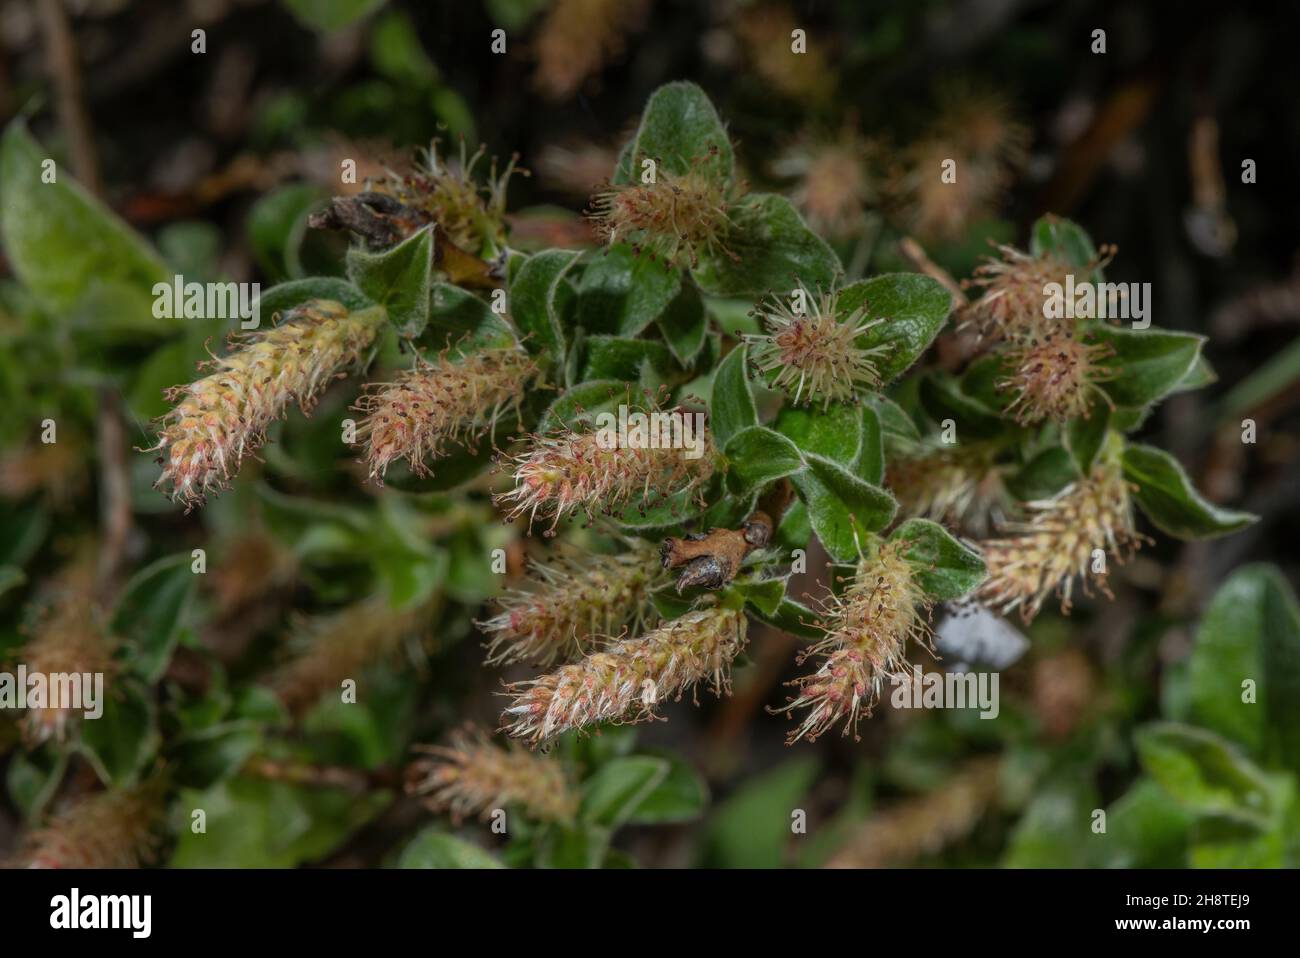 Pyrenean Willow, Salix pyrenaica, in flower. Male flowers.  Pyrenees. Stock Photo